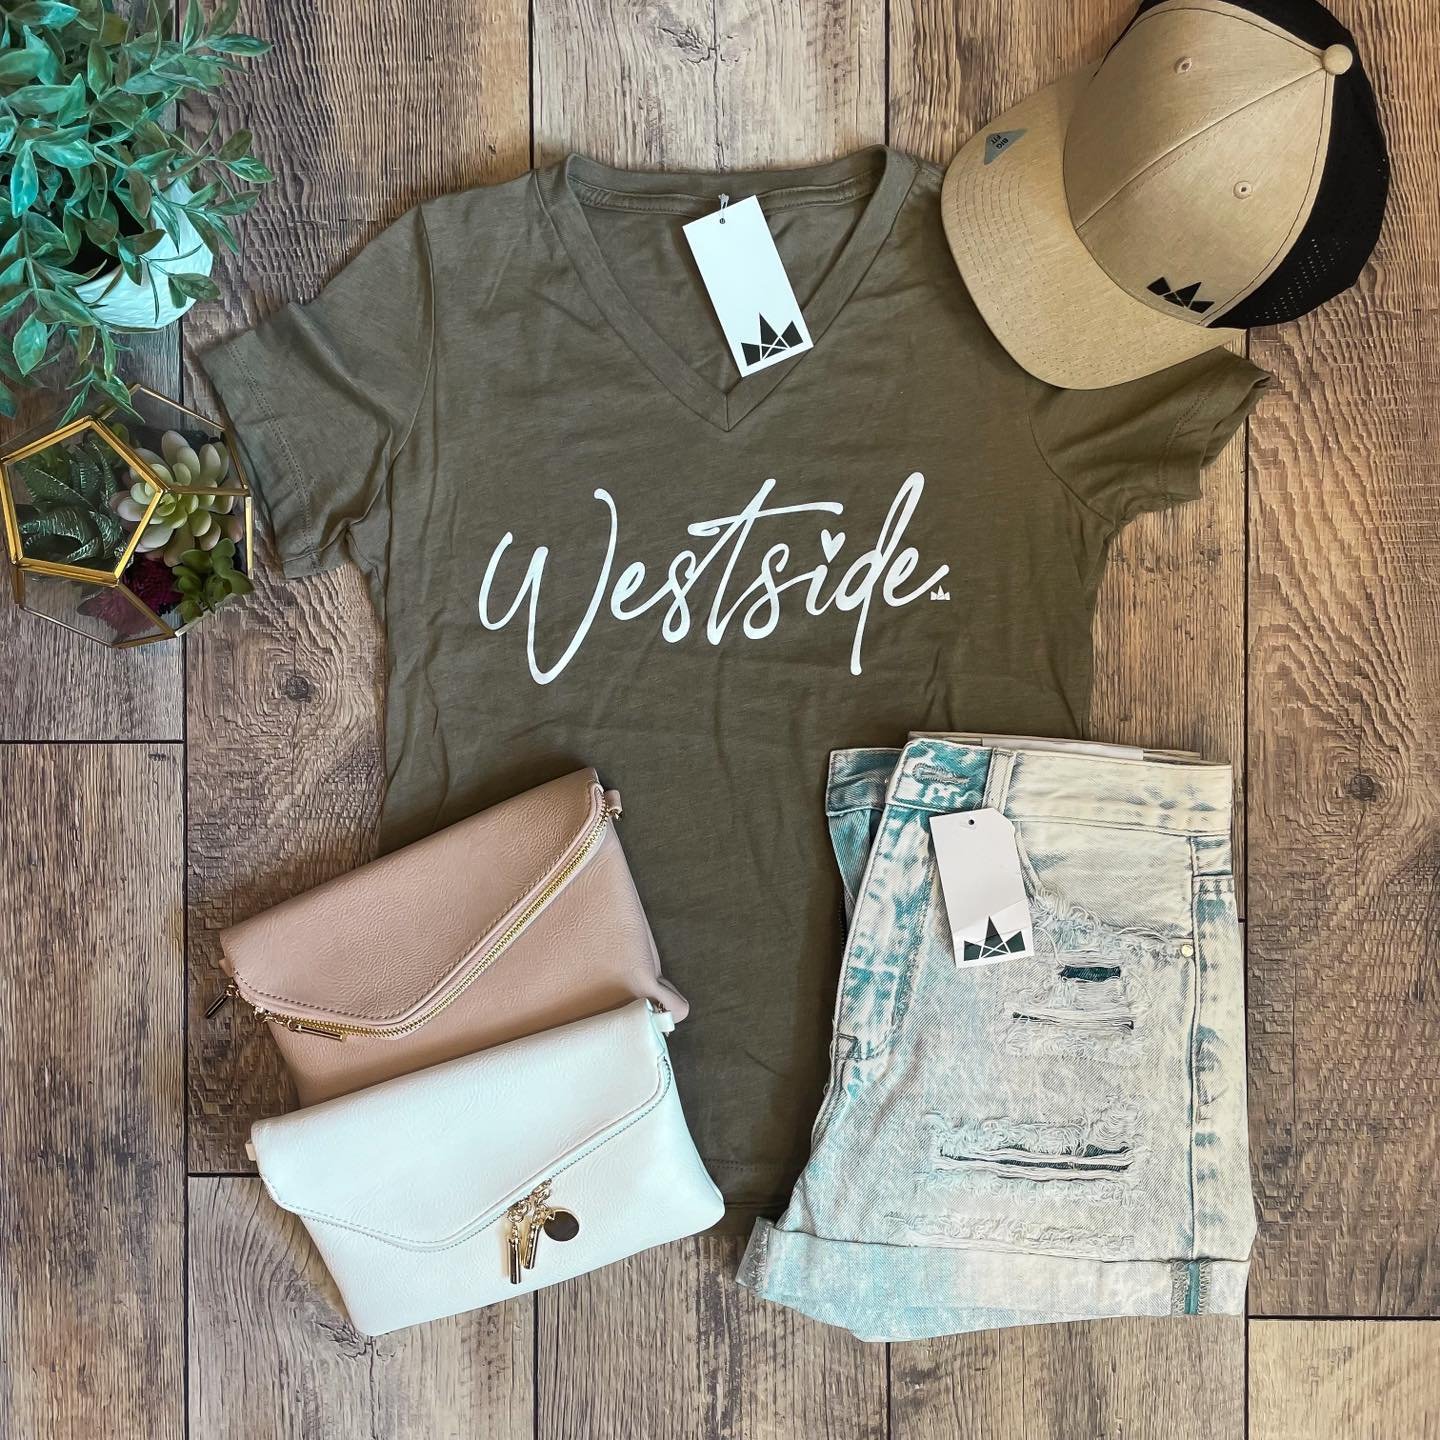 Westside BESTSIDE✌🏼💕🎉
&bull;
Queen City Revolt will be back this Saturday with your favorite Westside &amp; Cincy gear! 
&bull;
#westsidebestside #westsidemarketcincy #shoplocal #supportsmallbusiness